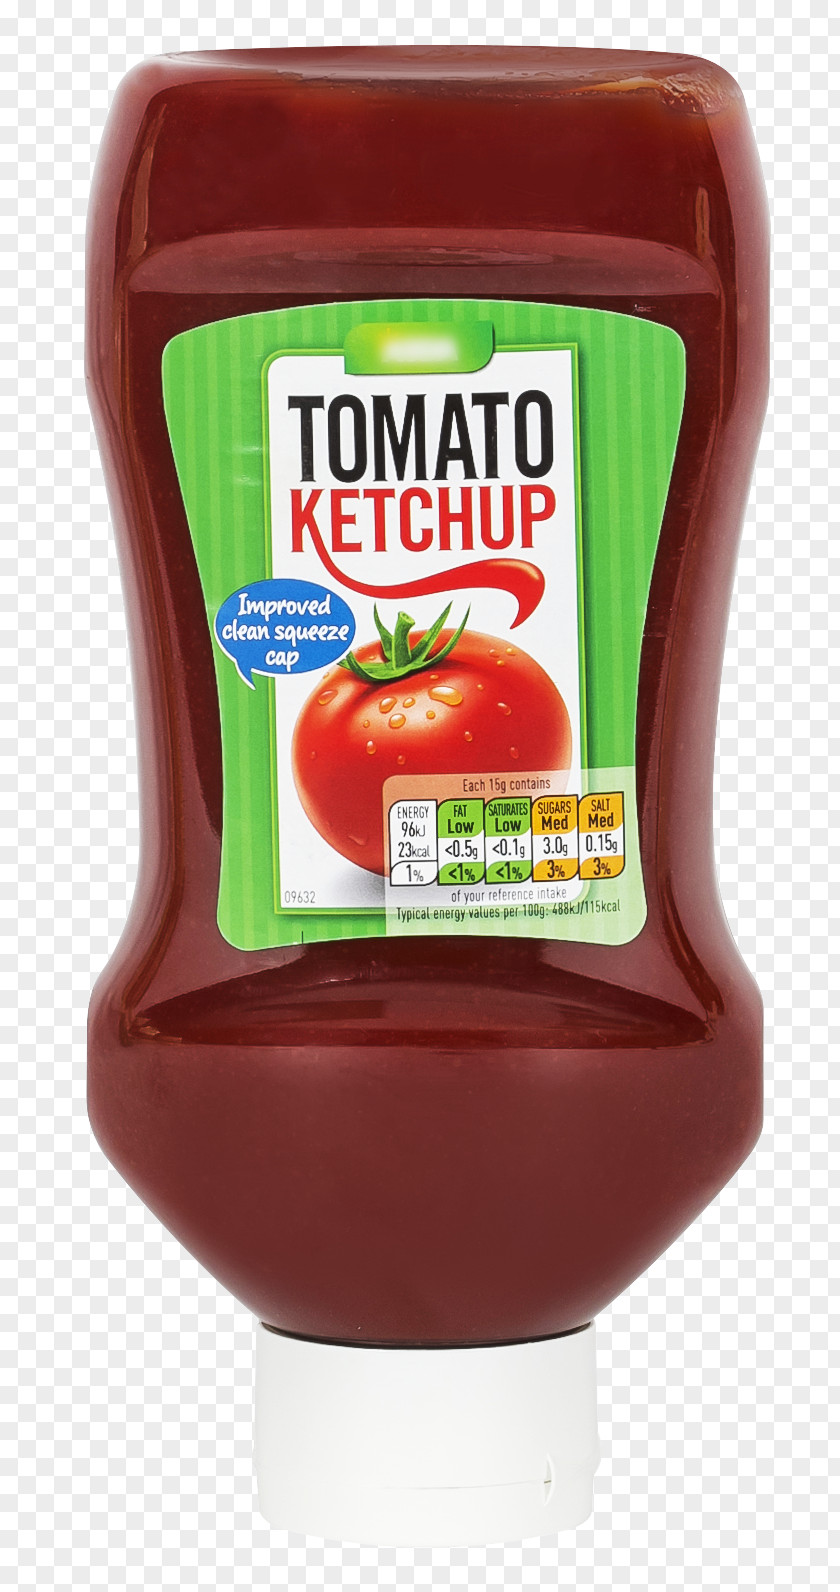 Bottle Ketchup Packaging And Labeling Sauce Glass PNG